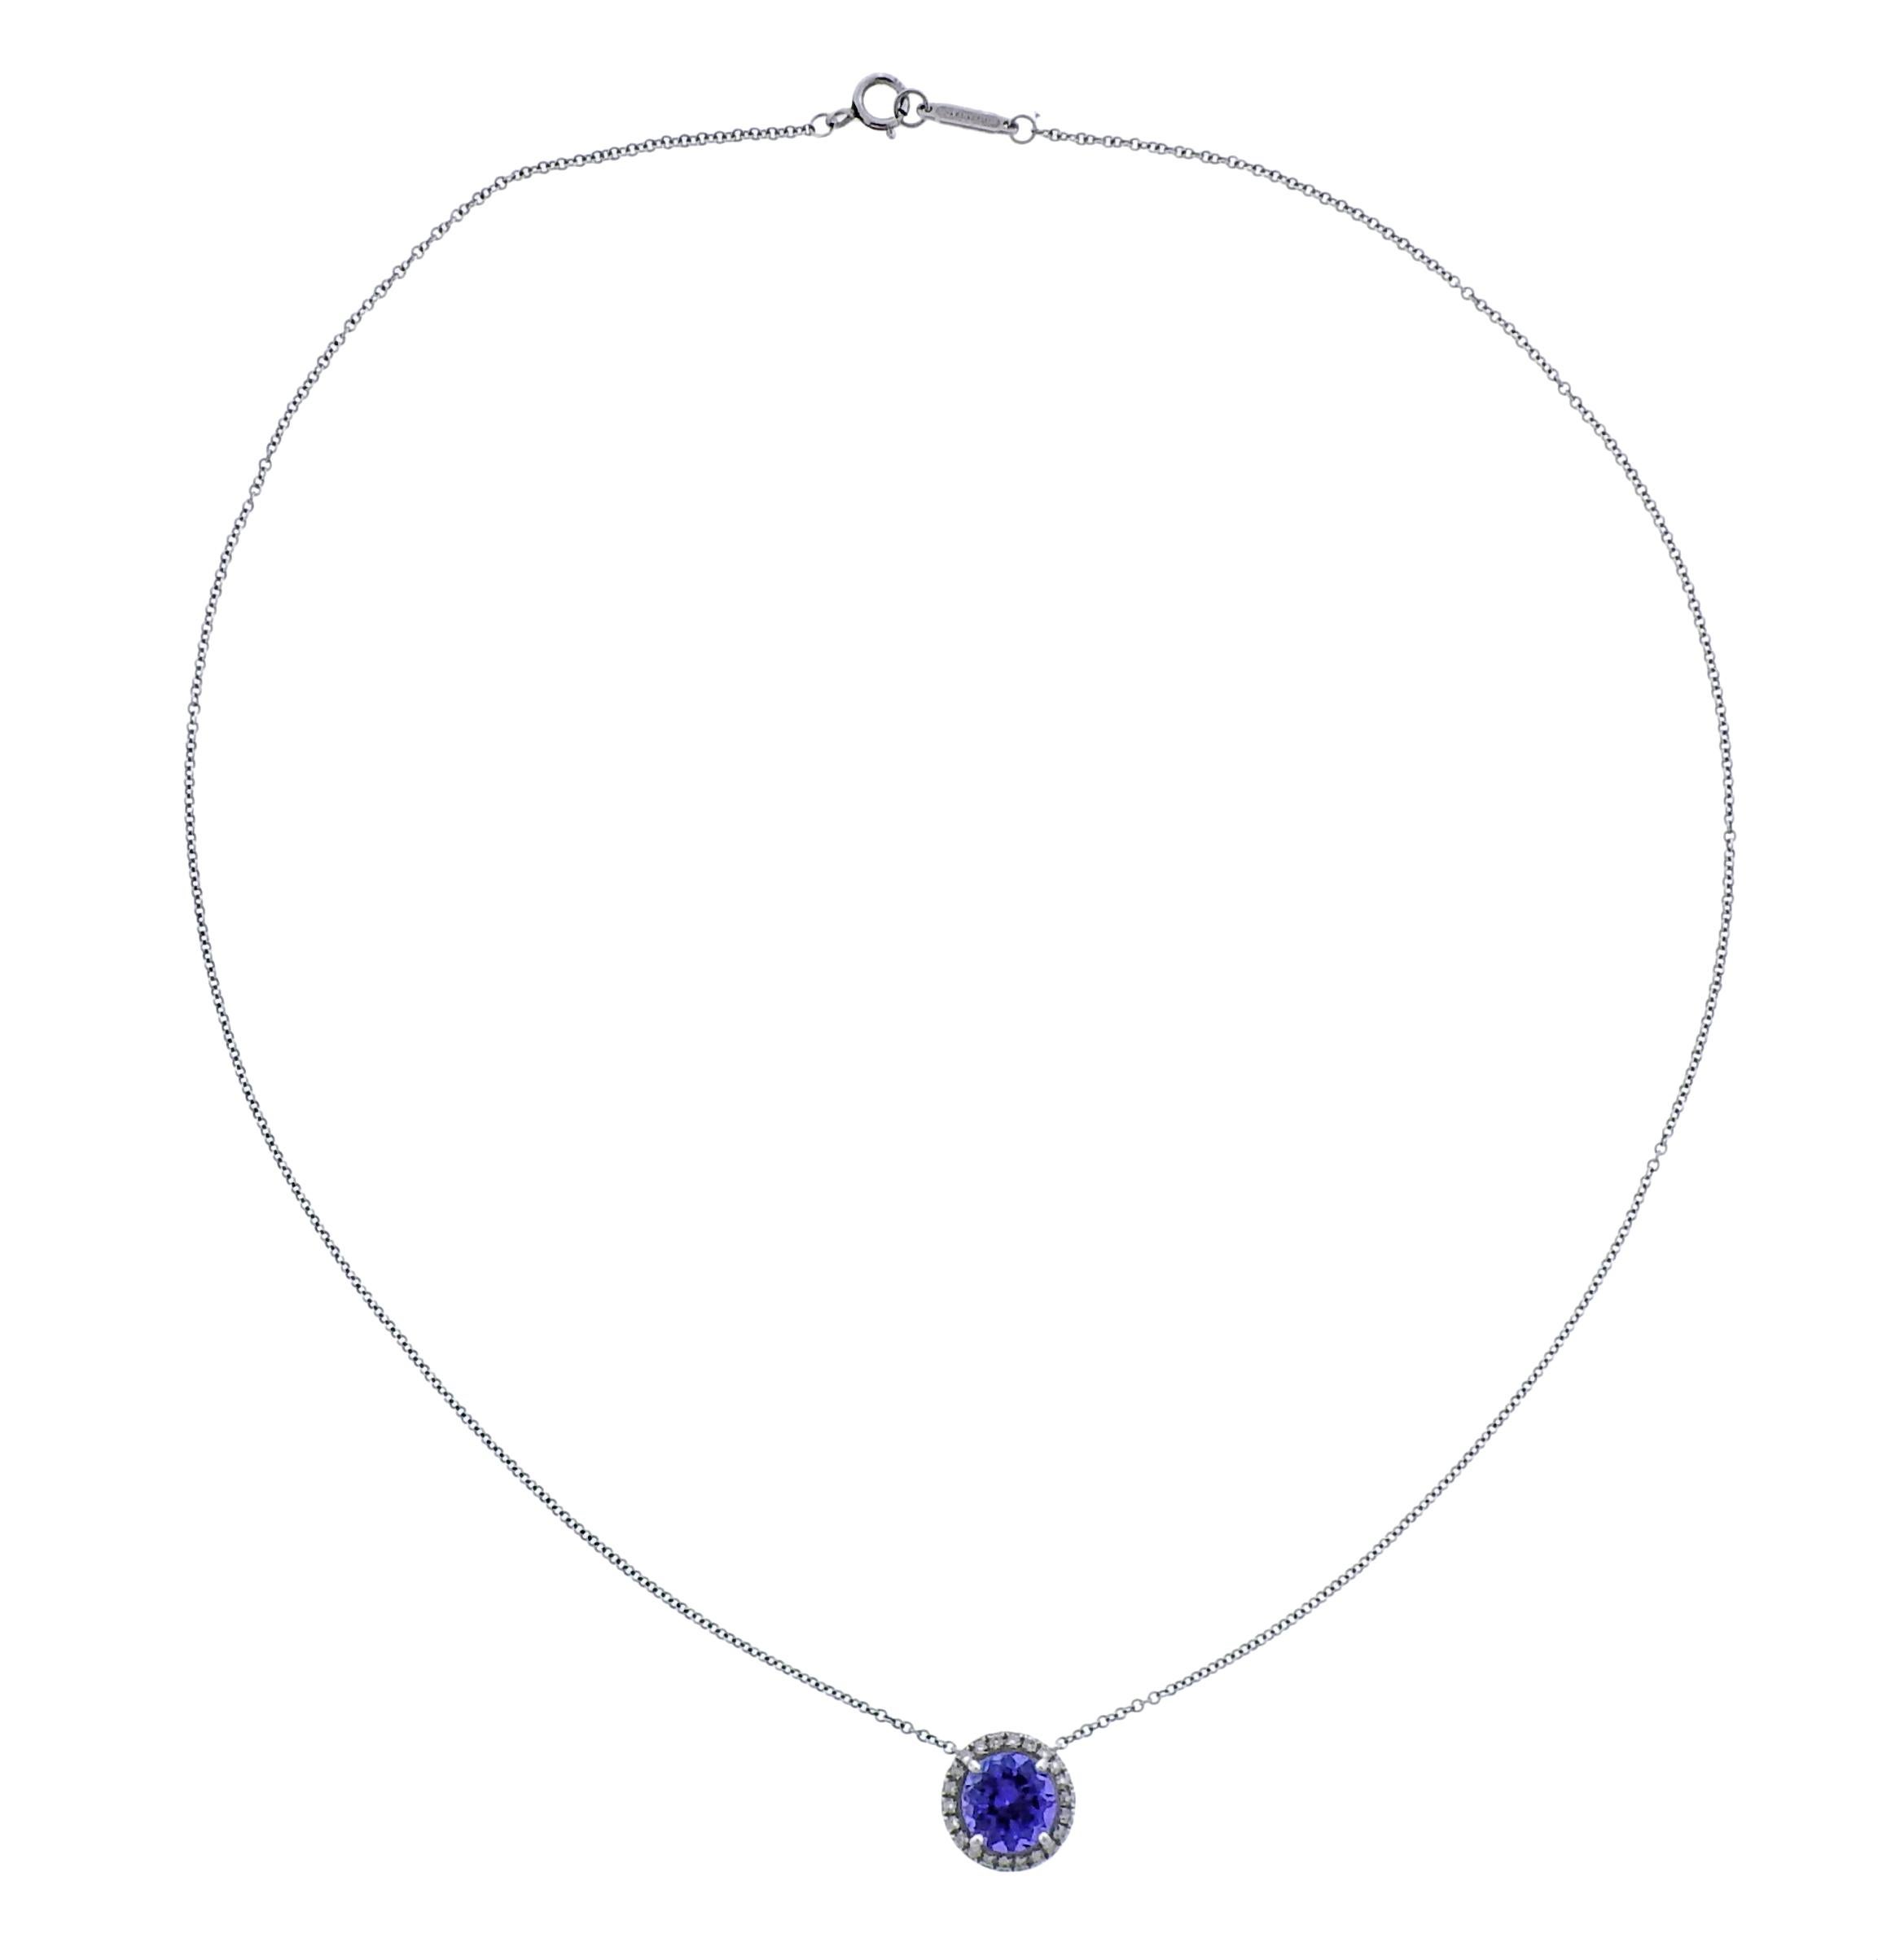 Platinum Soleste necklace with pendant by Tiffany & Co, with approx. 2 carat tanzanite and 0.09ctw in G/VS diamonds. Retail $6400, comes with box.   Necklace is 16